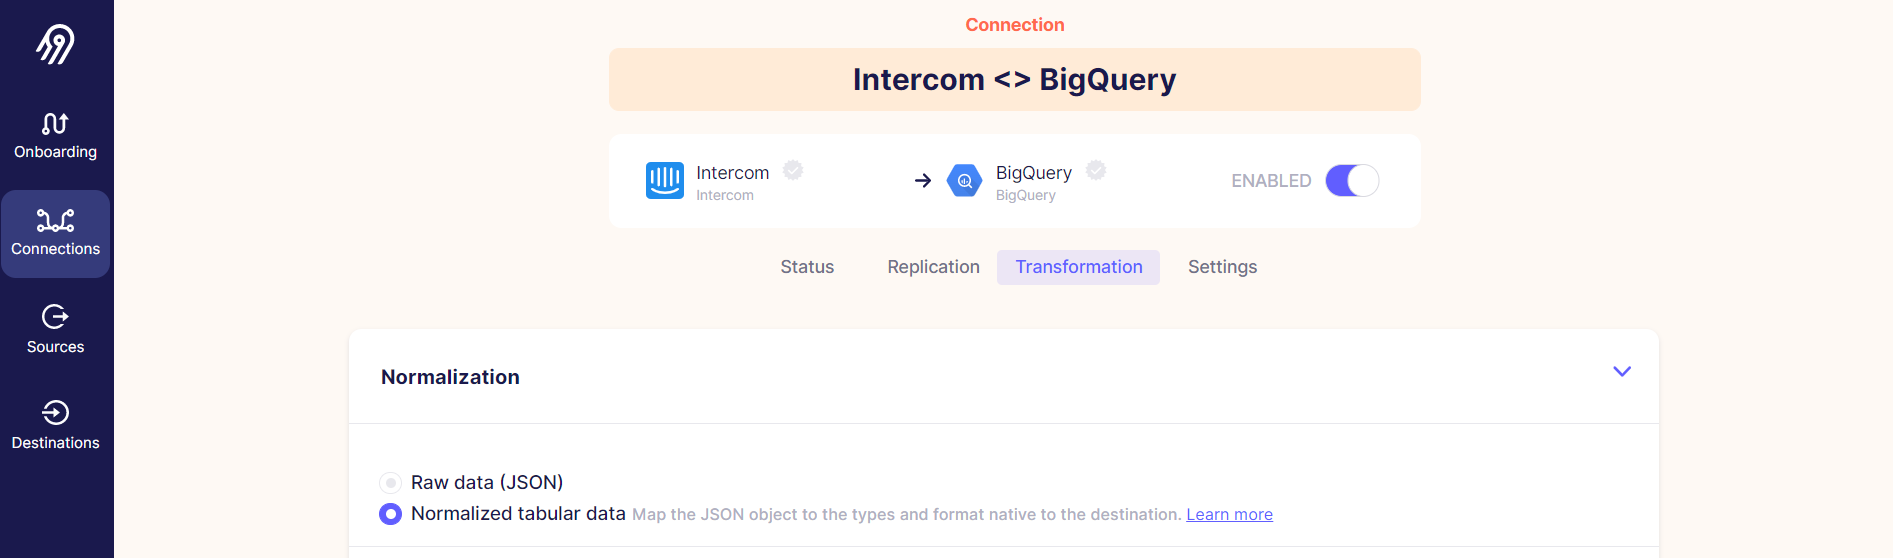 Airbyte Intercom to BigQuery connection